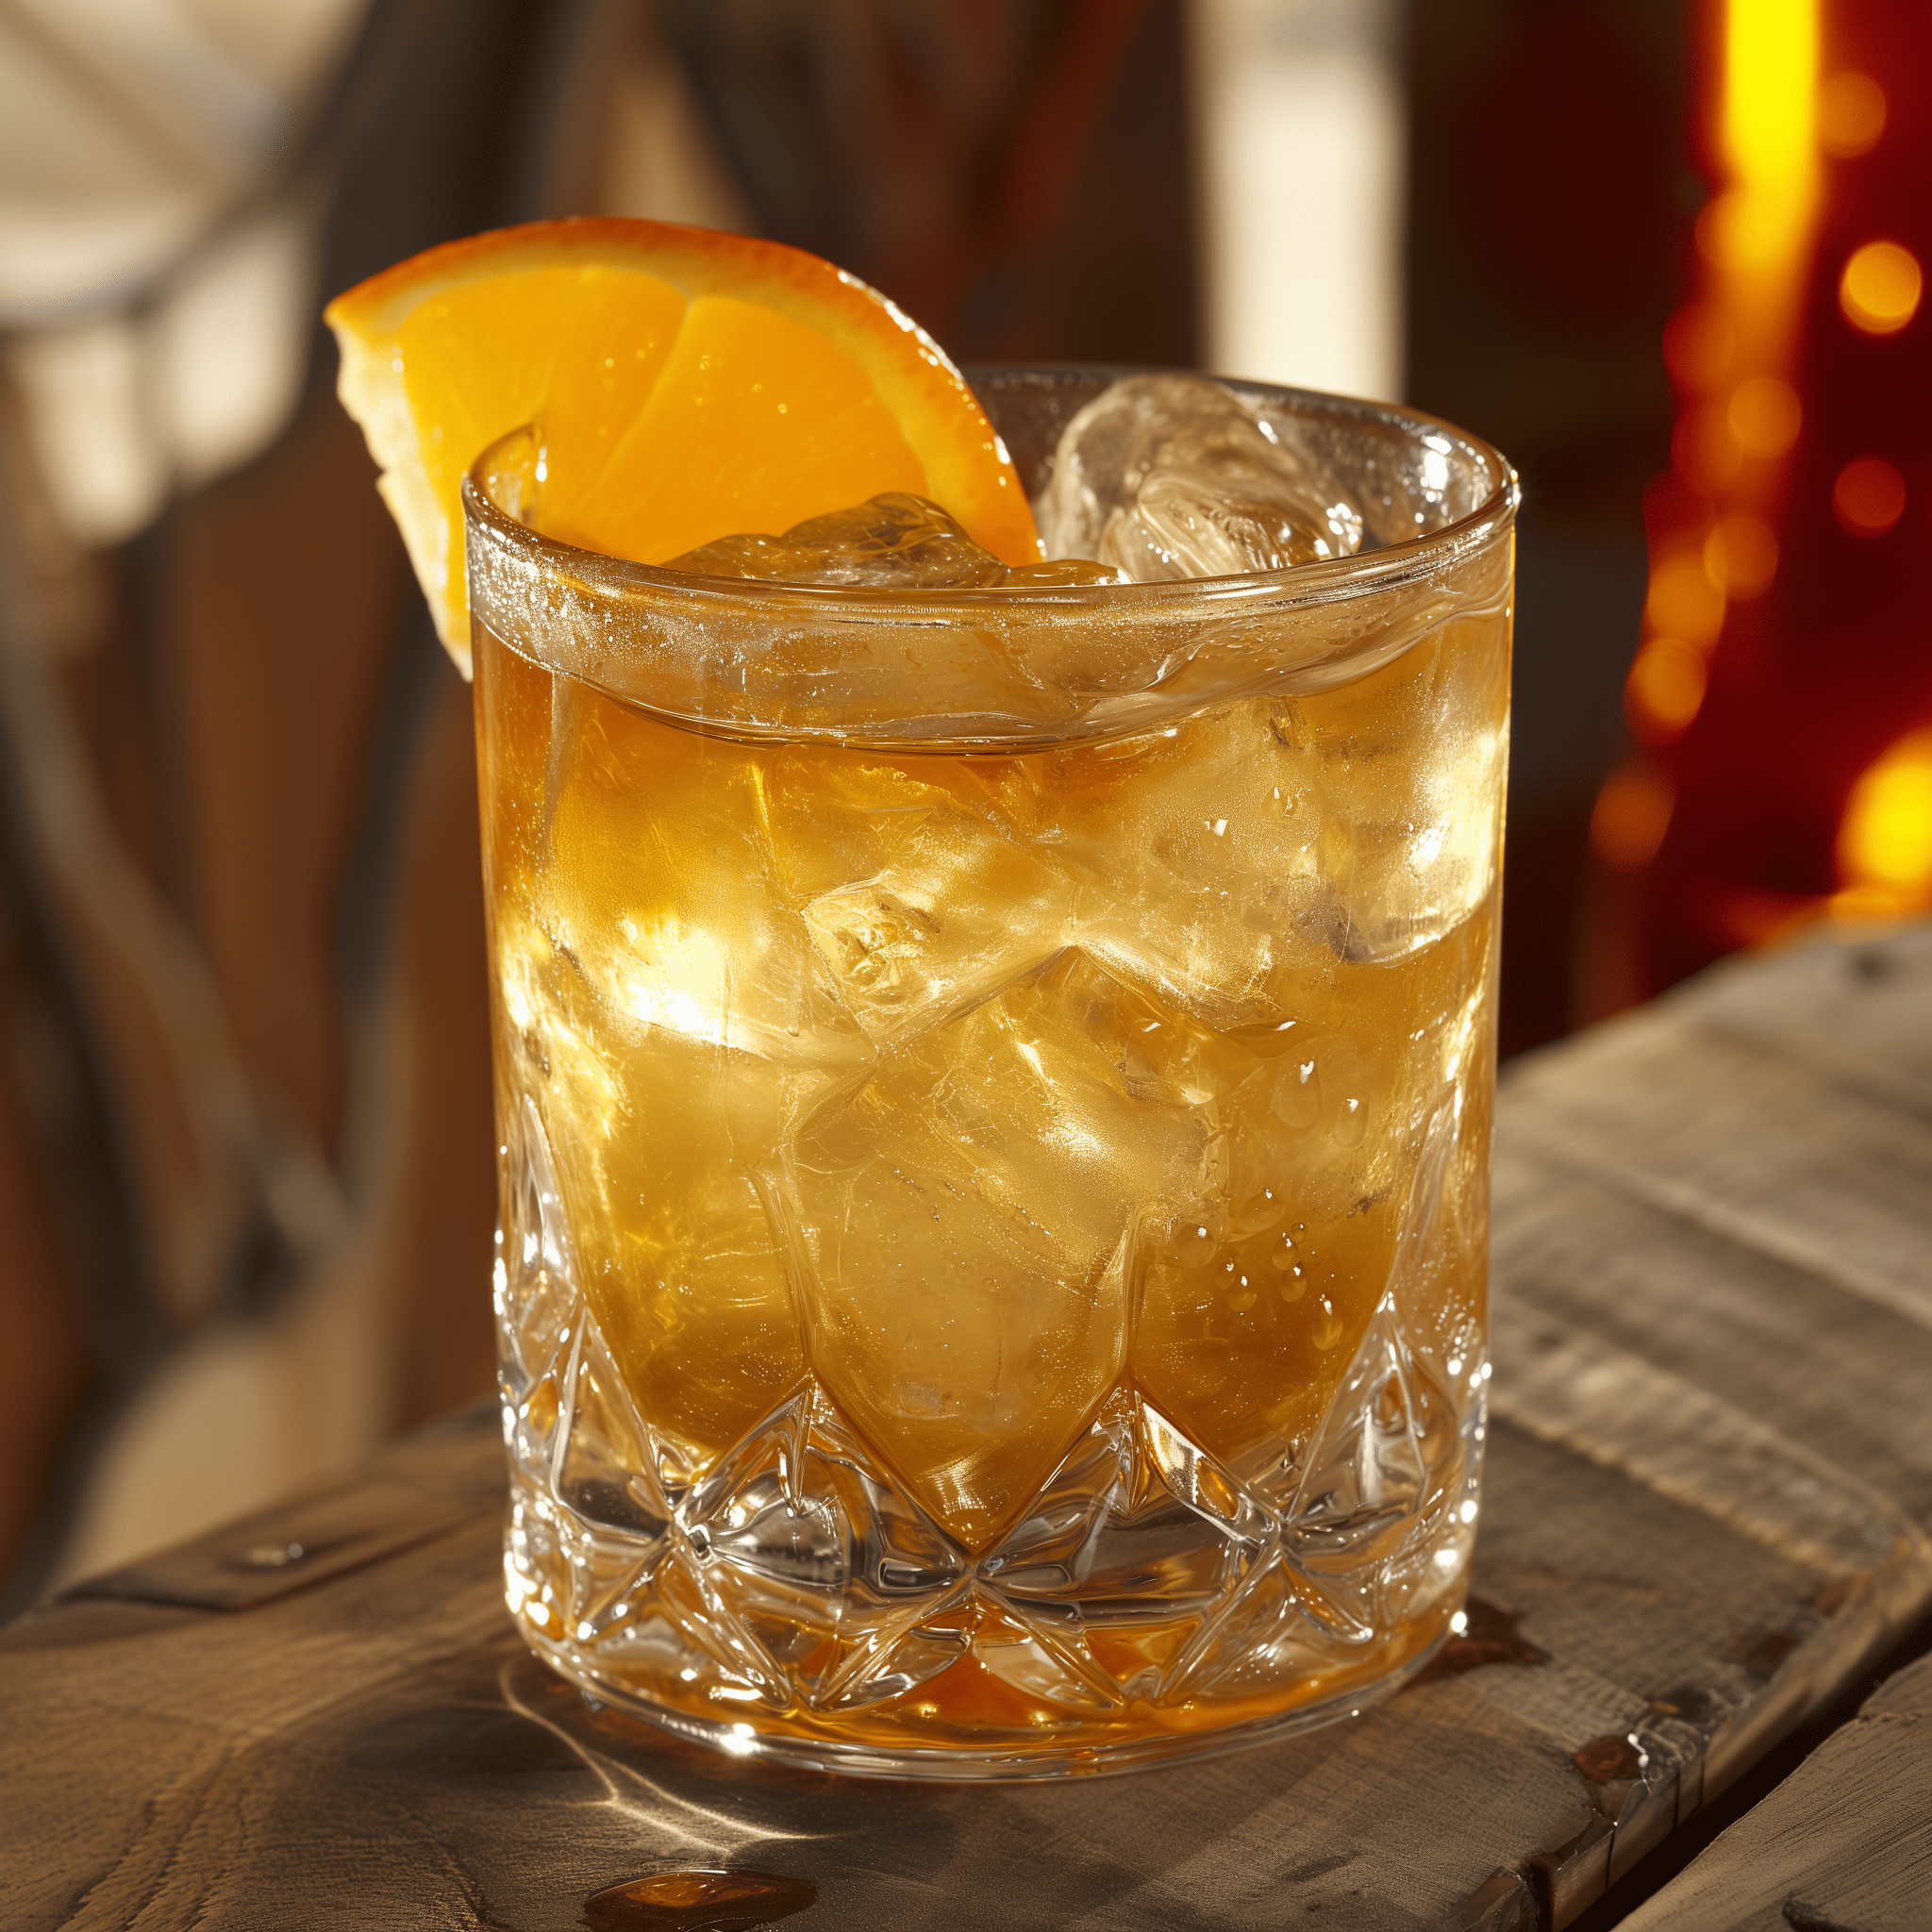 Keeneland Breeze Cocktail Recipe - The Keeneland Breeze offers a harmonious blend of sweet, citrus, and spicy notes. The bourbon provides a robust foundation, while the orange curaçao and fresh orange add a zesty sweetness. The ginger ale or beer tops it off with a refreshing fizz and a hint of spice.